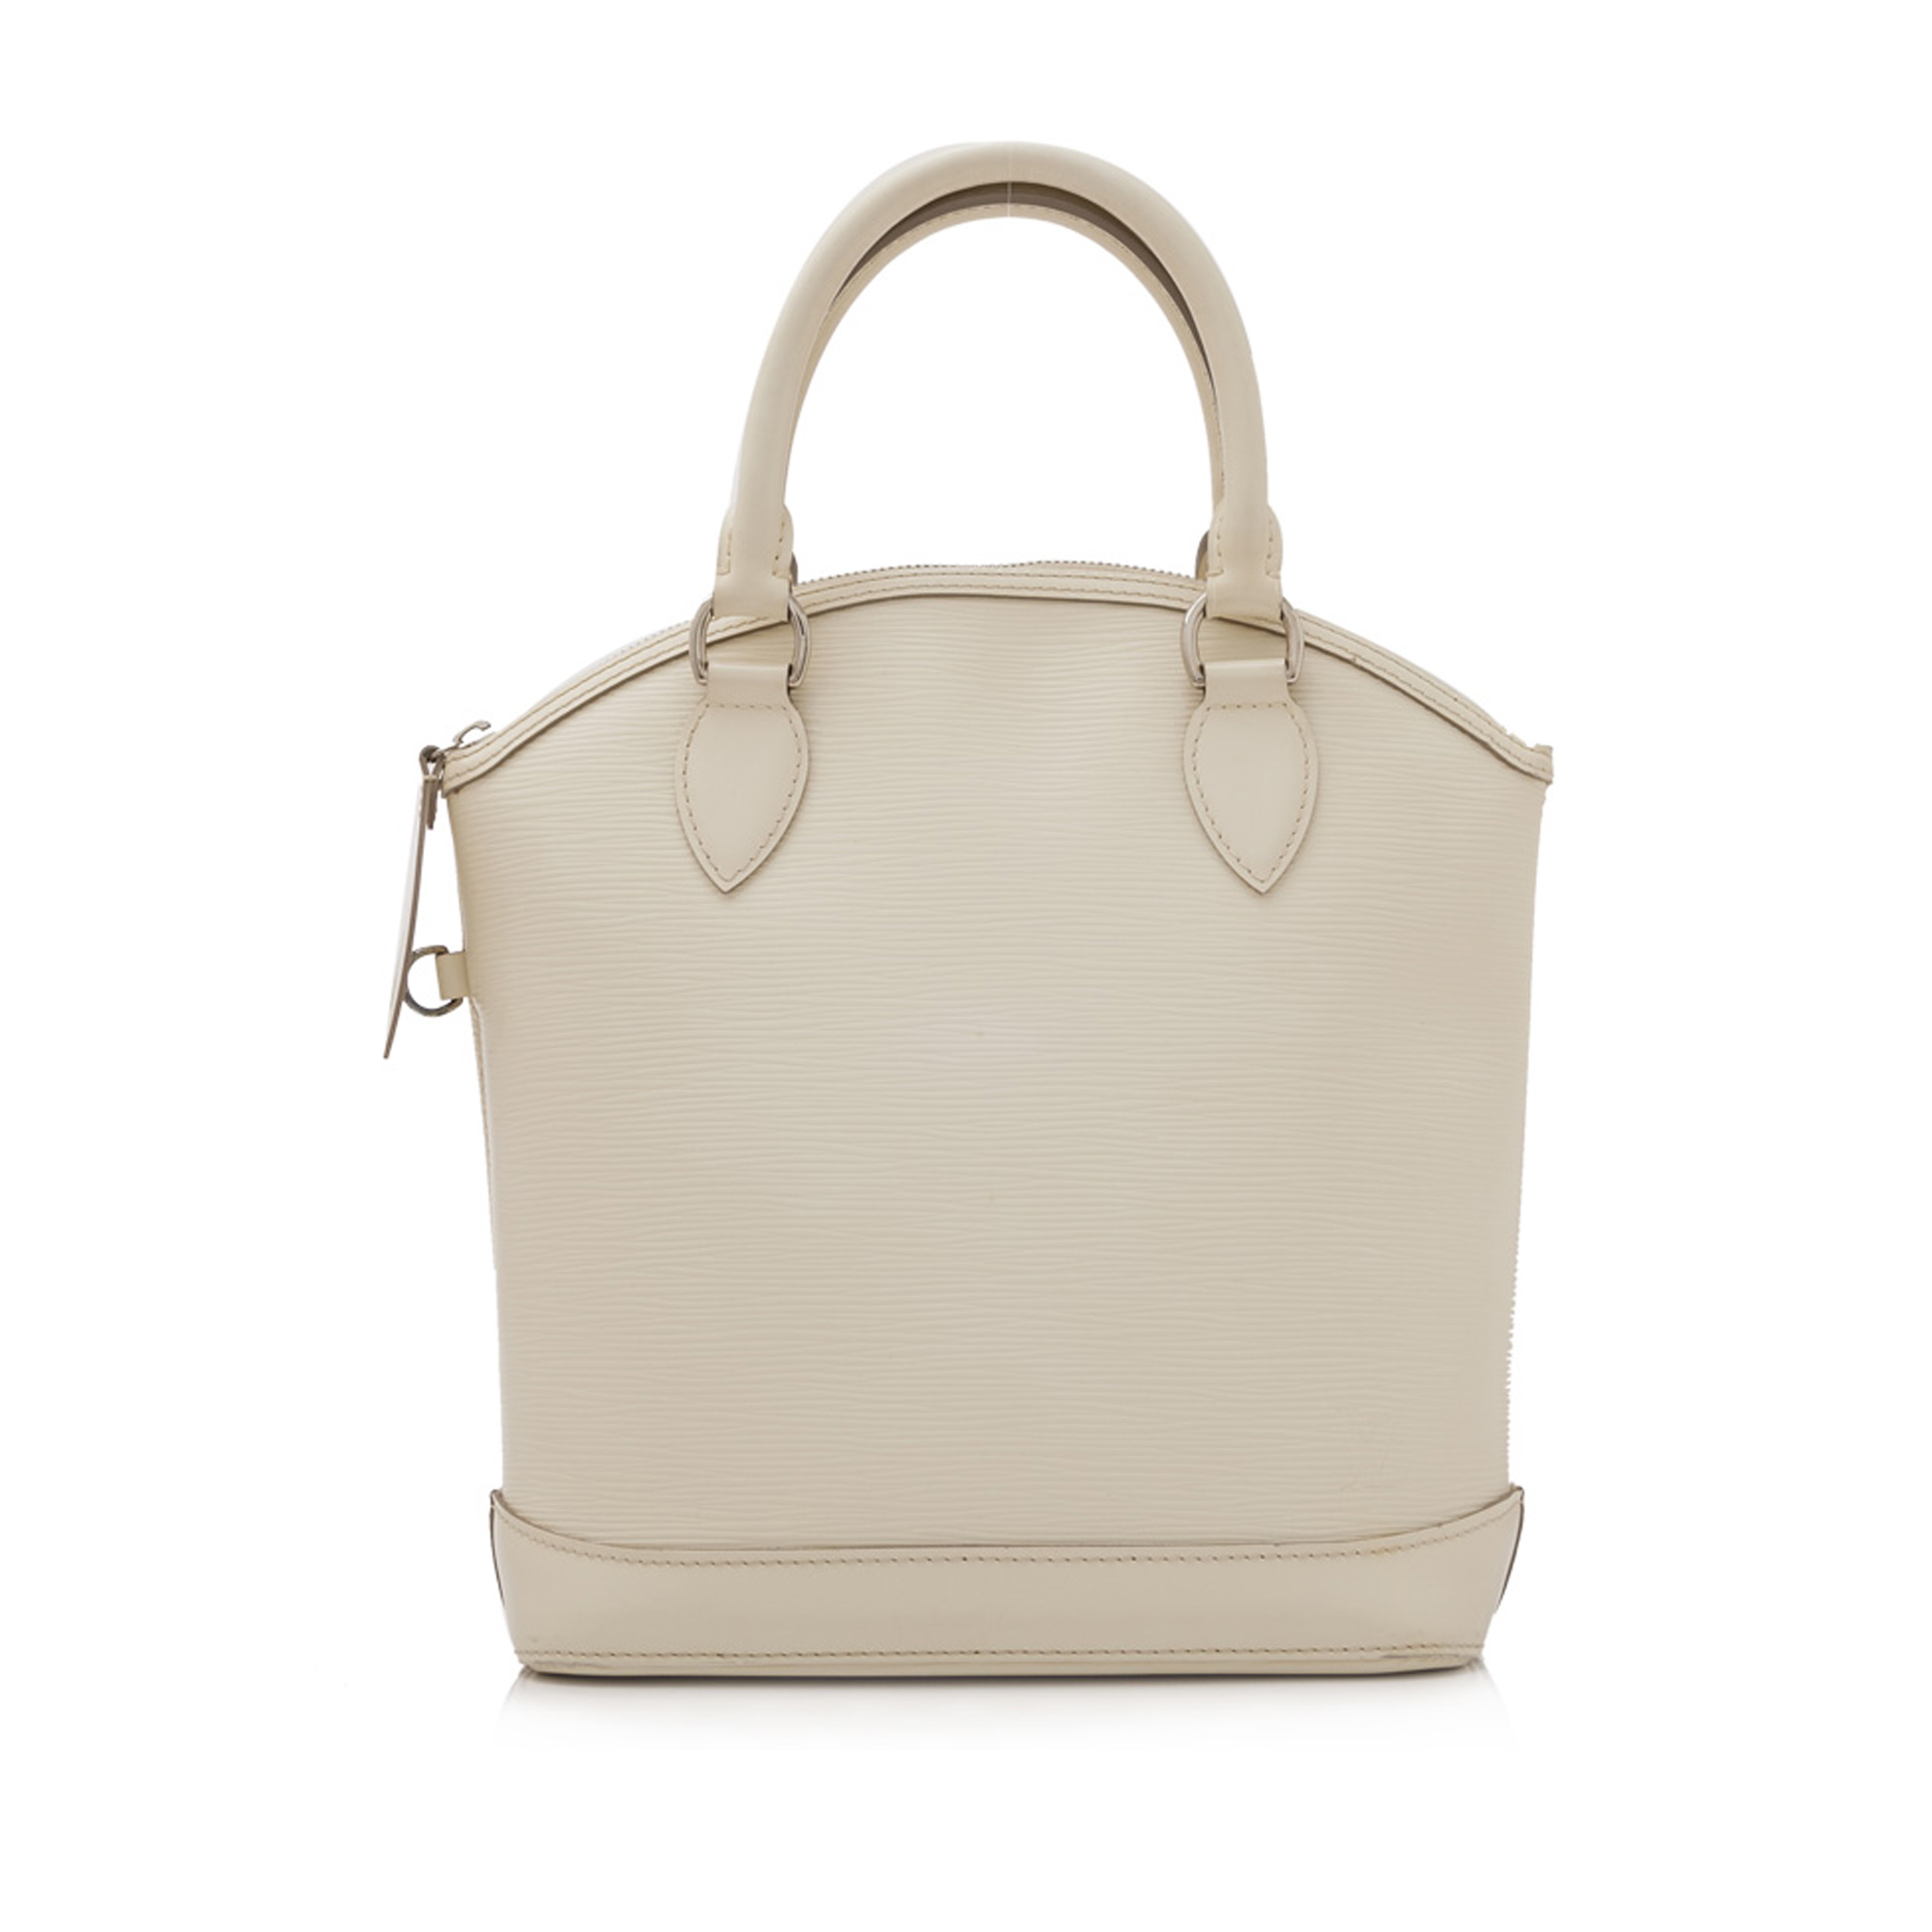 Pre-Loved Louis Vuitton White Ivory Epi Leather Lockit Vertical France | eBay